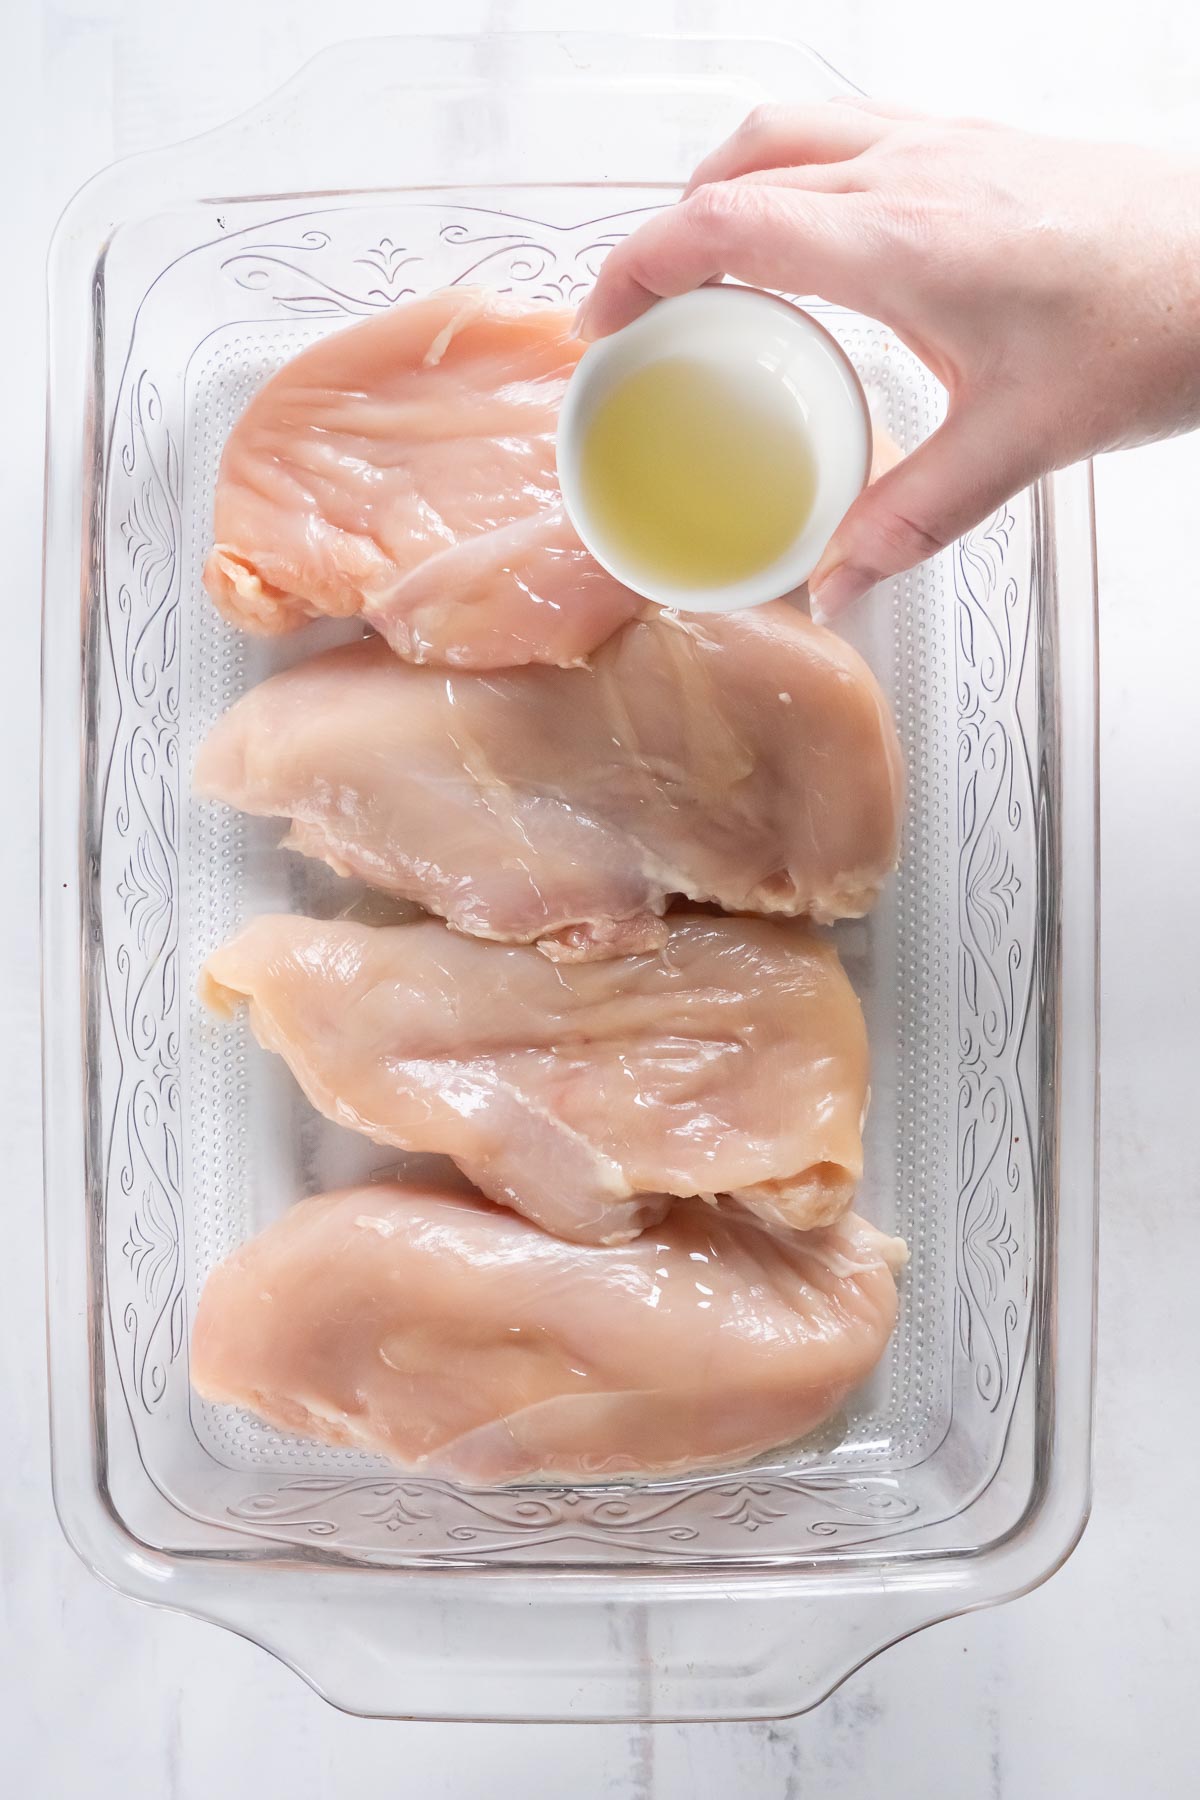 Pouring olive oil over raw chicken breasts in baking dish.